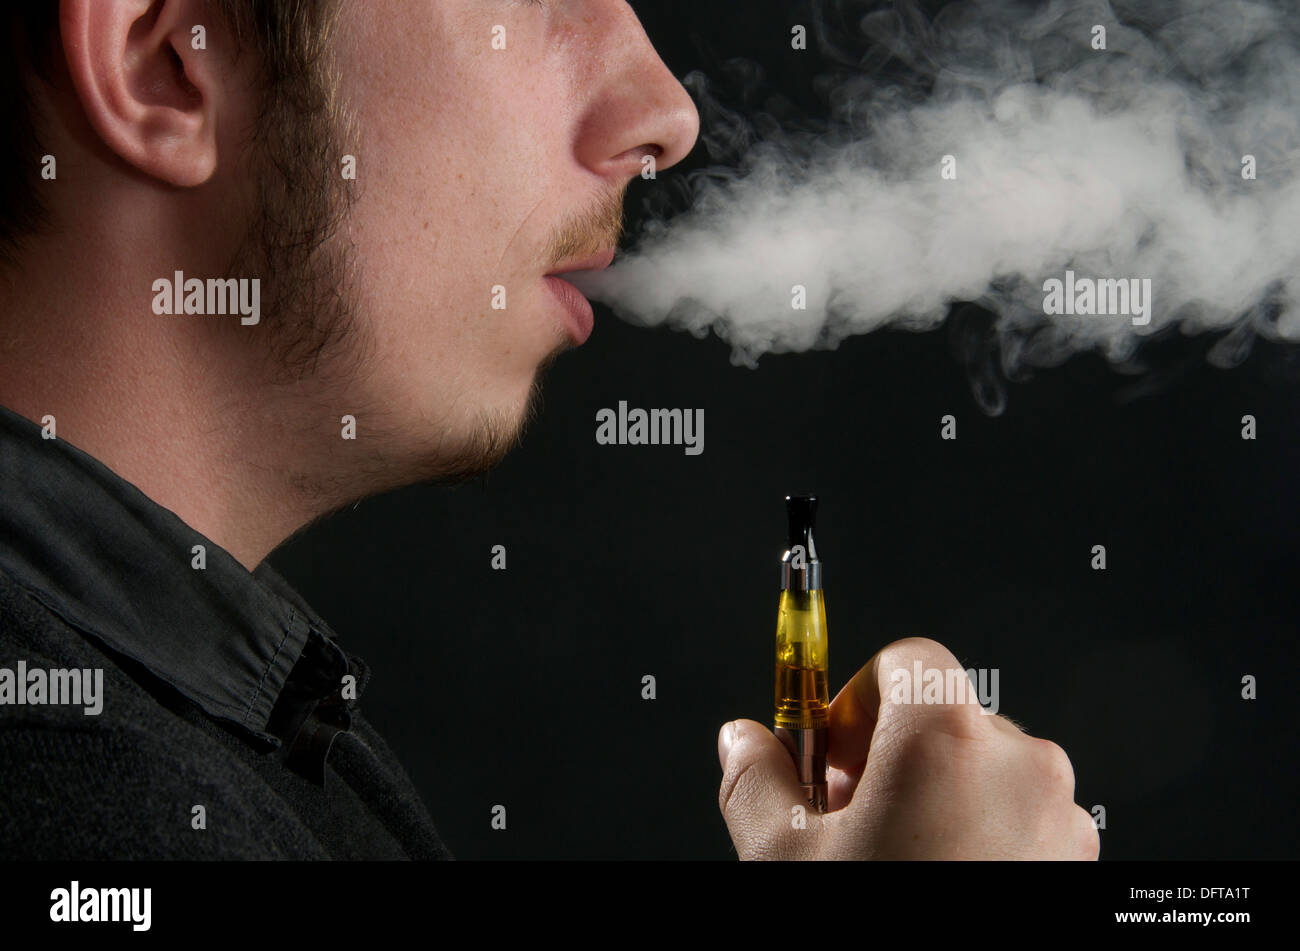 Man smoking an electronic cigarette and exhaling vapour Stock Photo